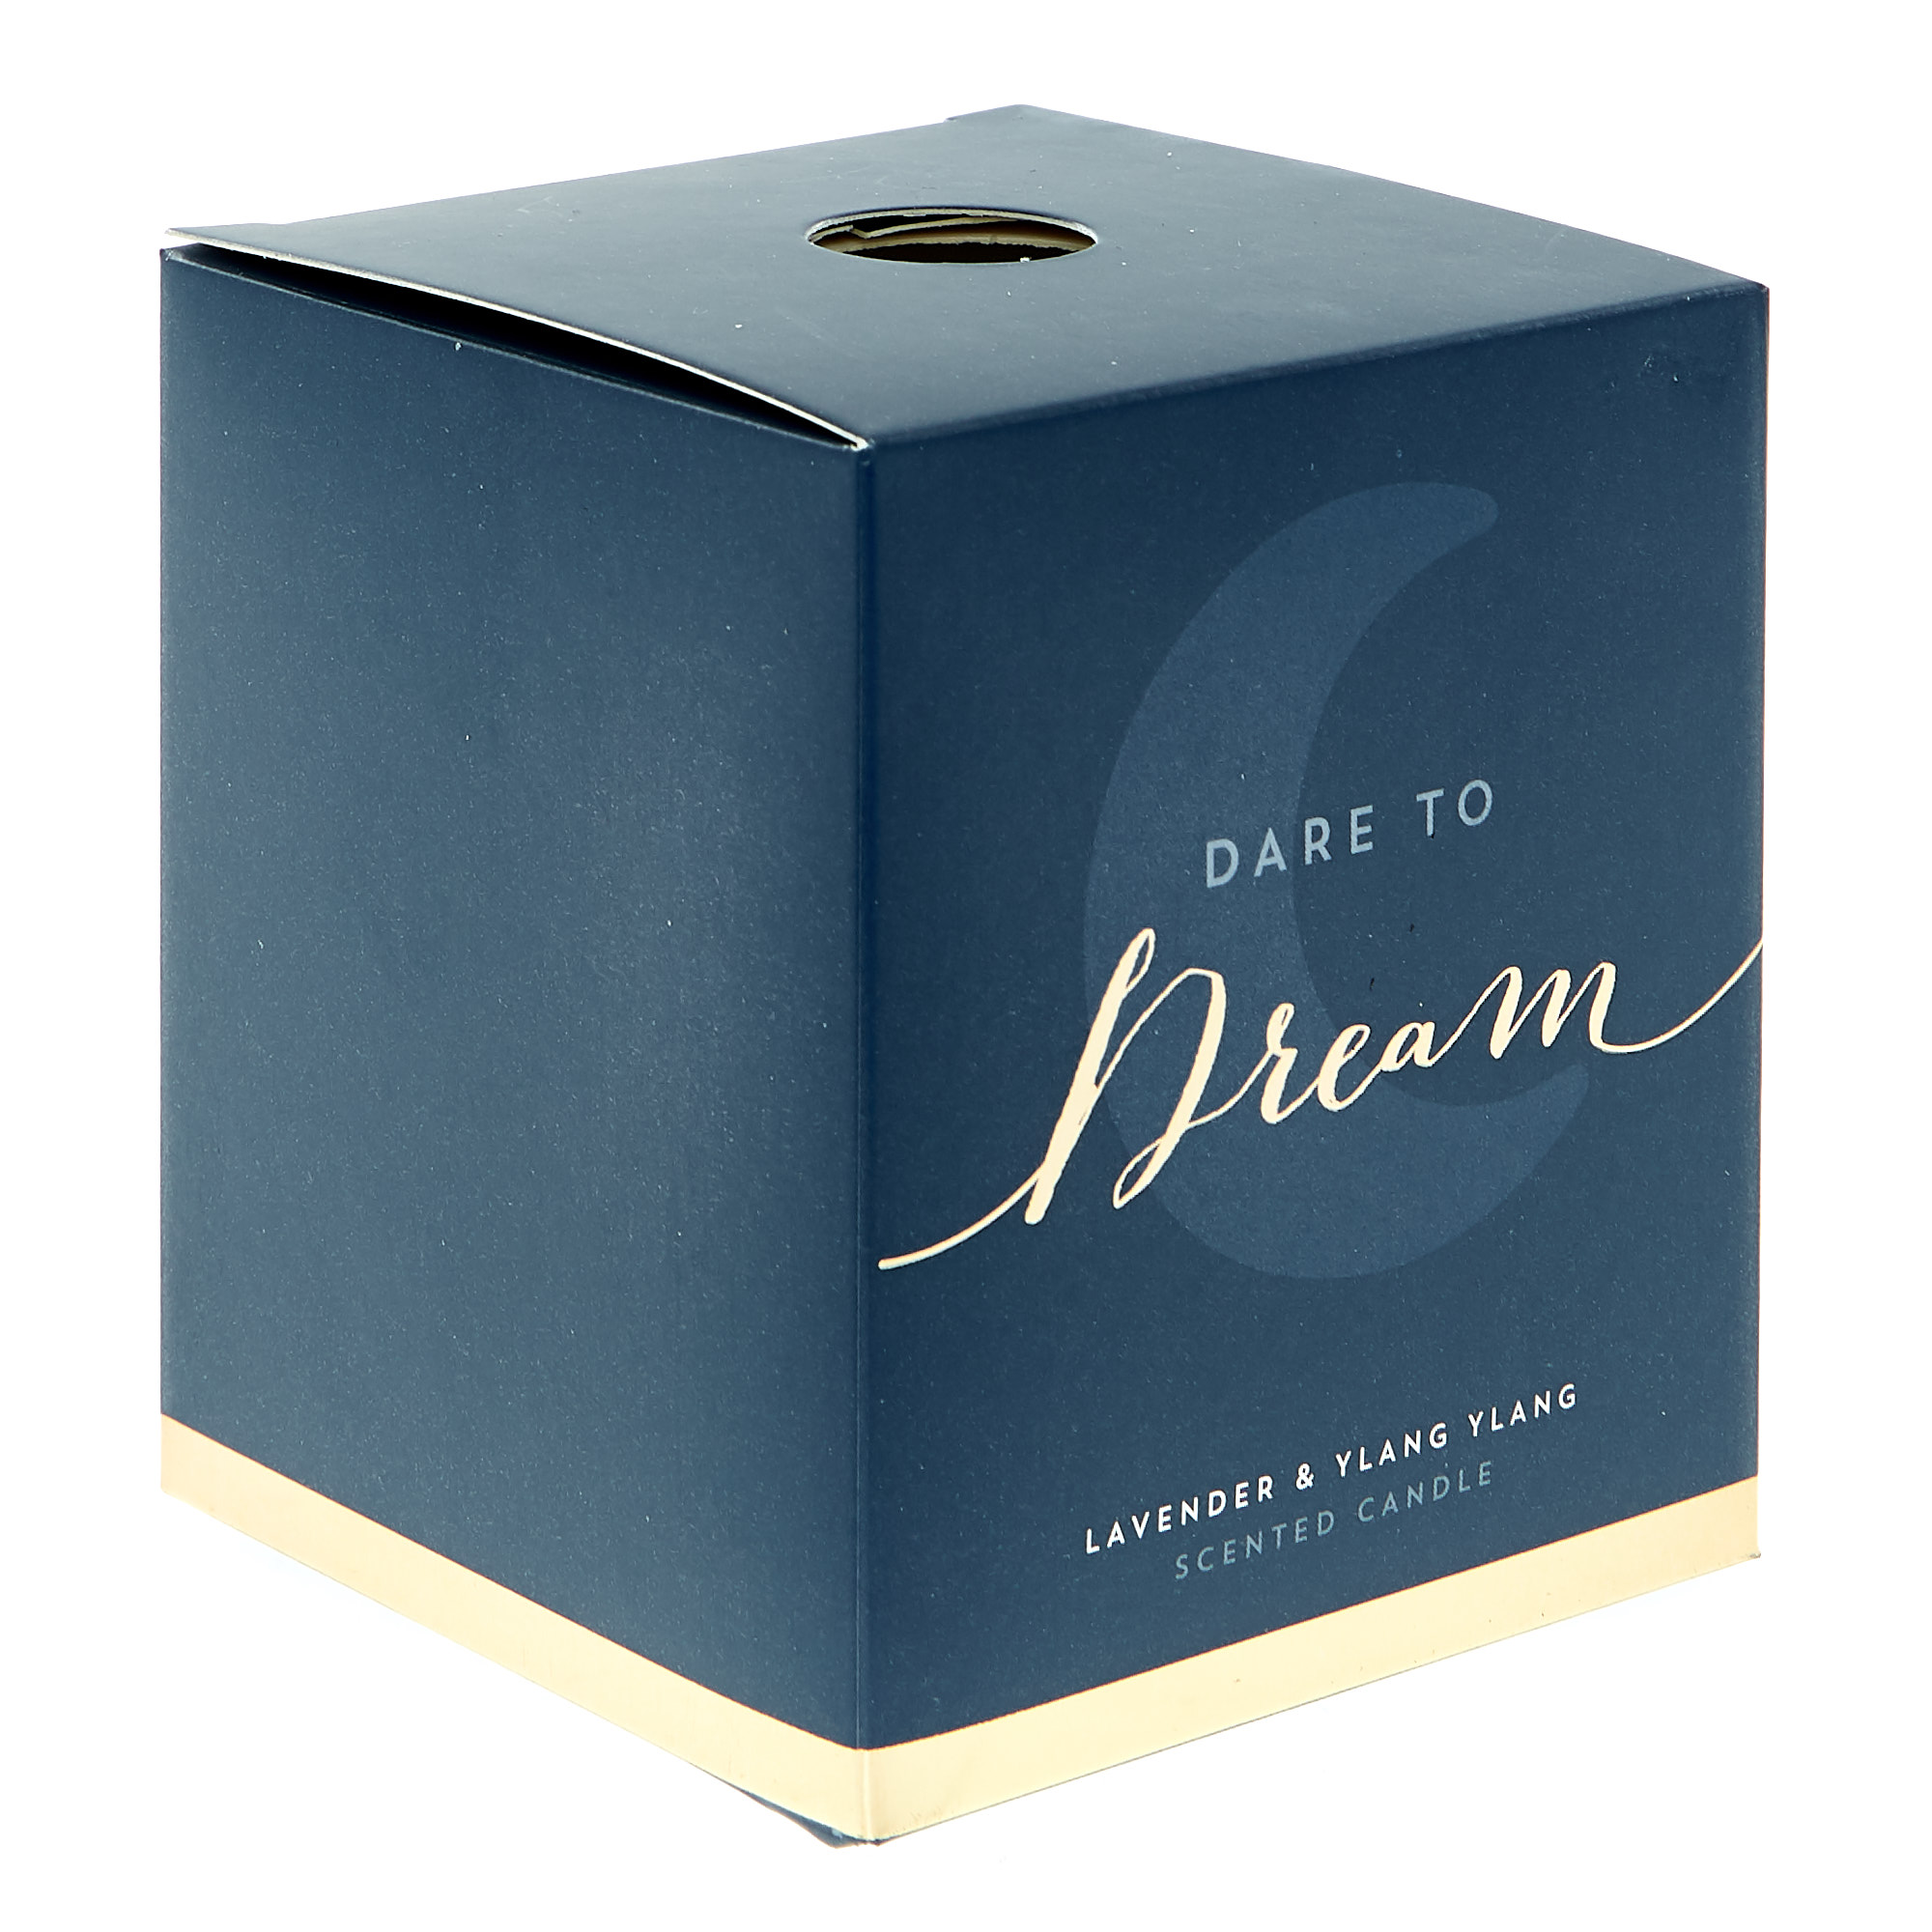 Dare to Dream Boxed Candle